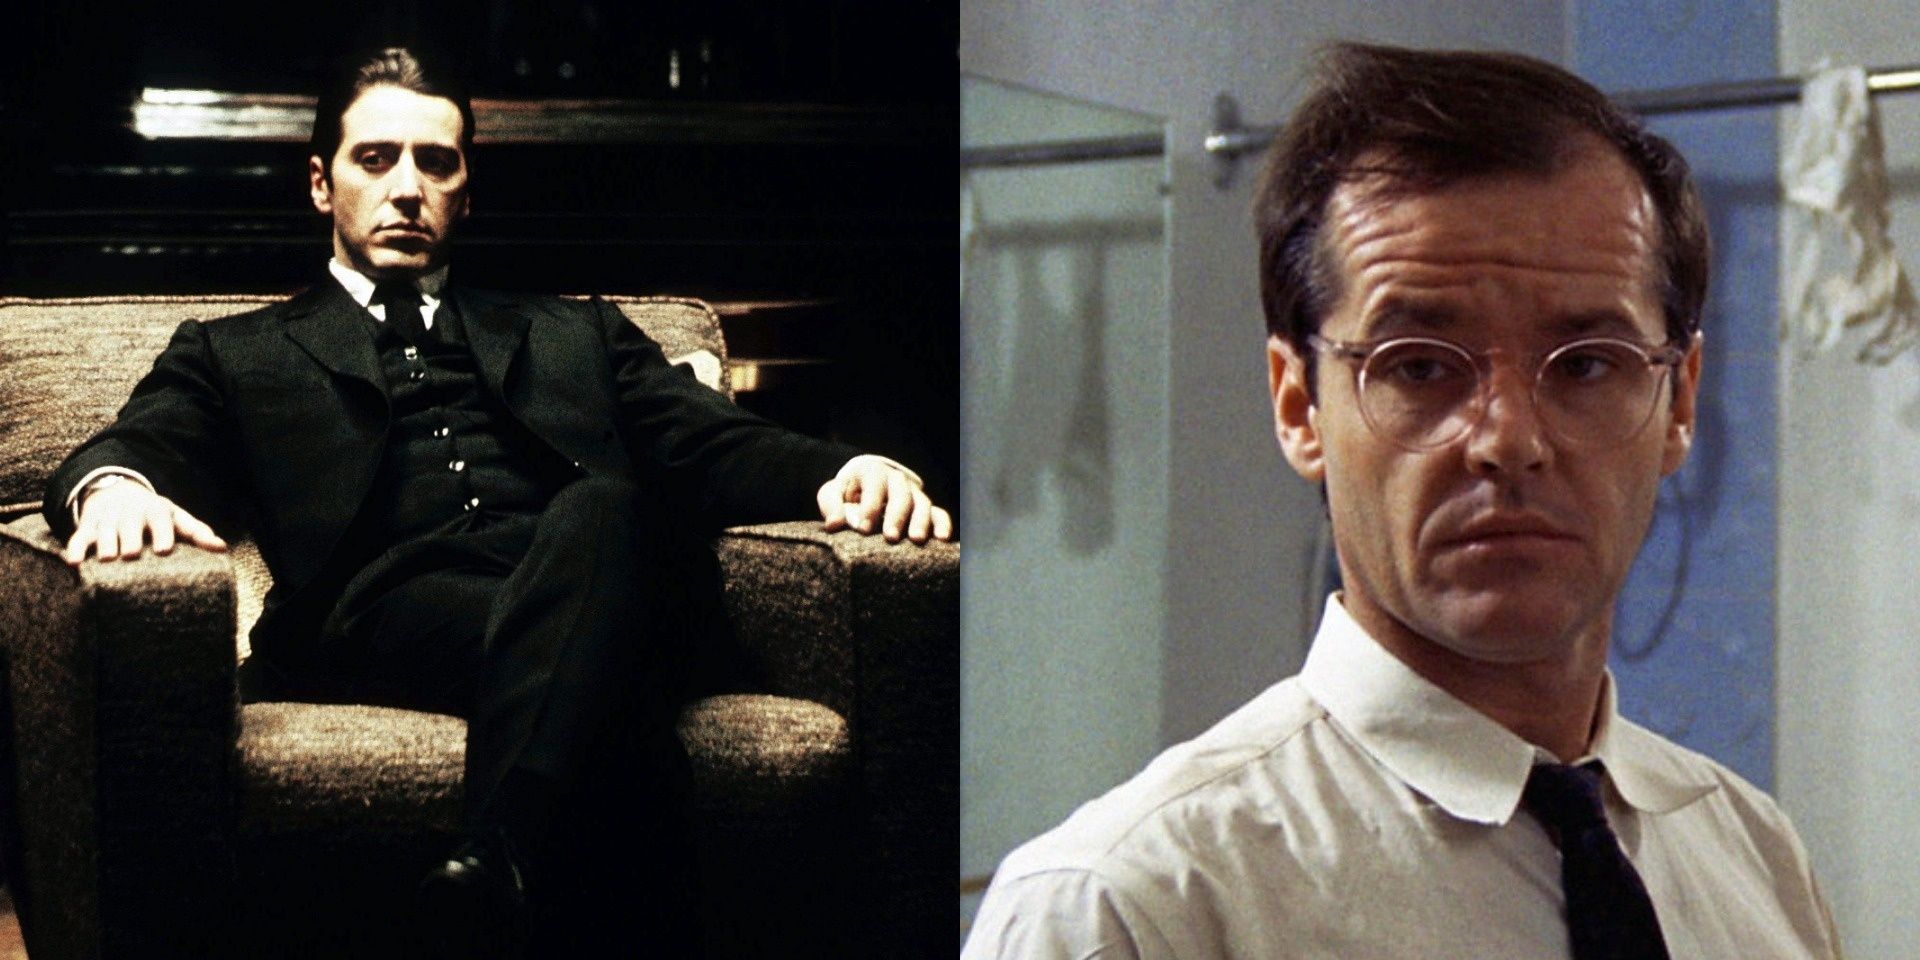 Michael Corleone was almost played by Jack Nicholson.